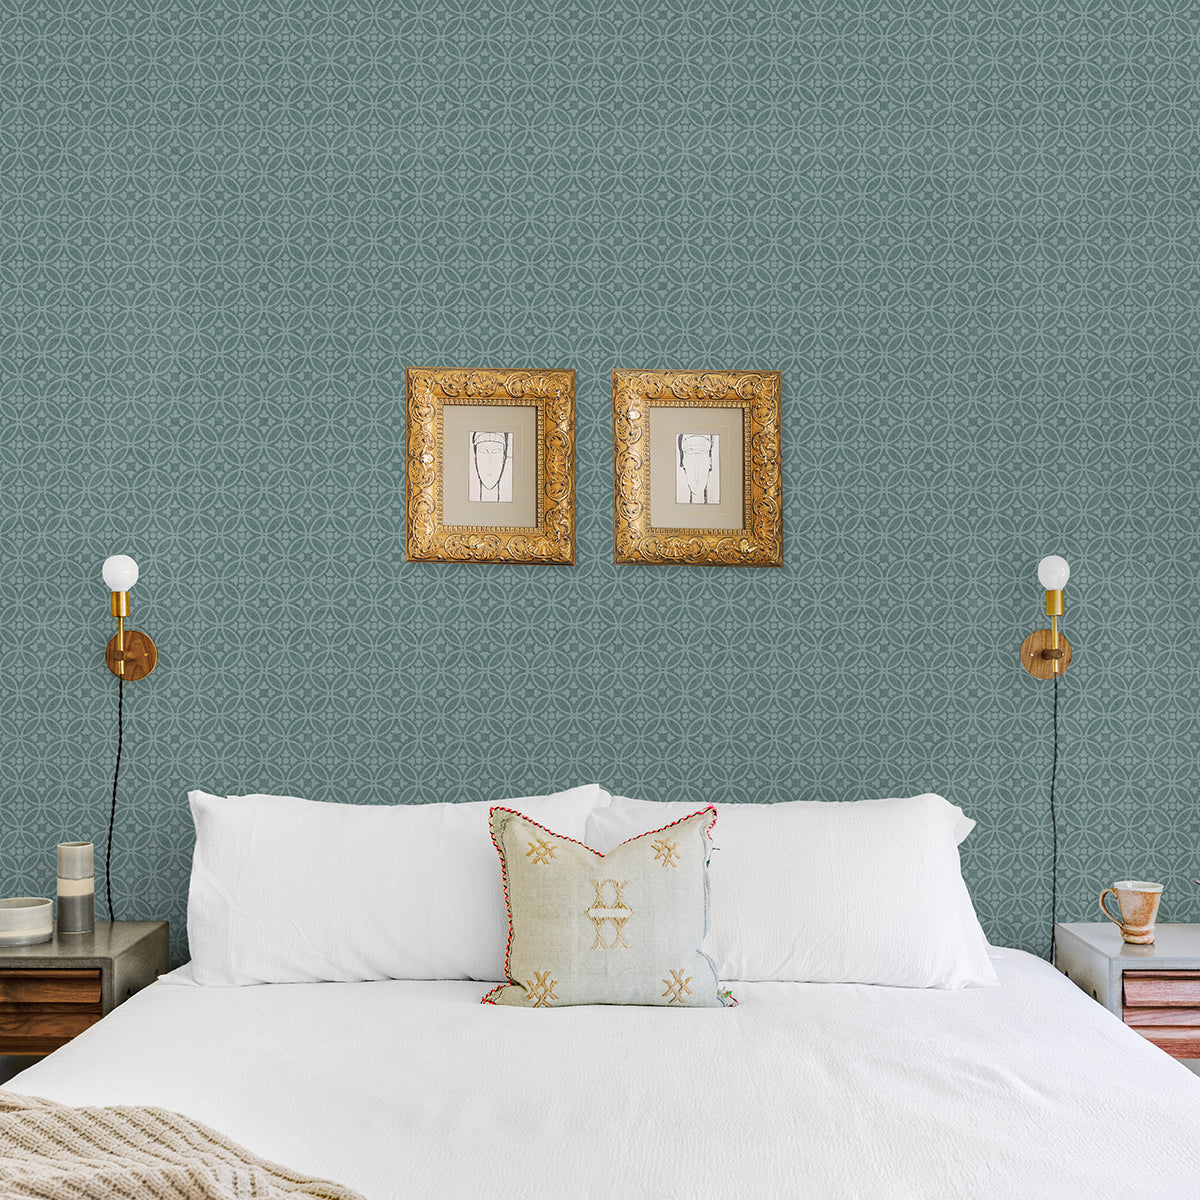 Larsson Teal Ogee Wallpaper  | Brewster Wallcovering - The WorkRm